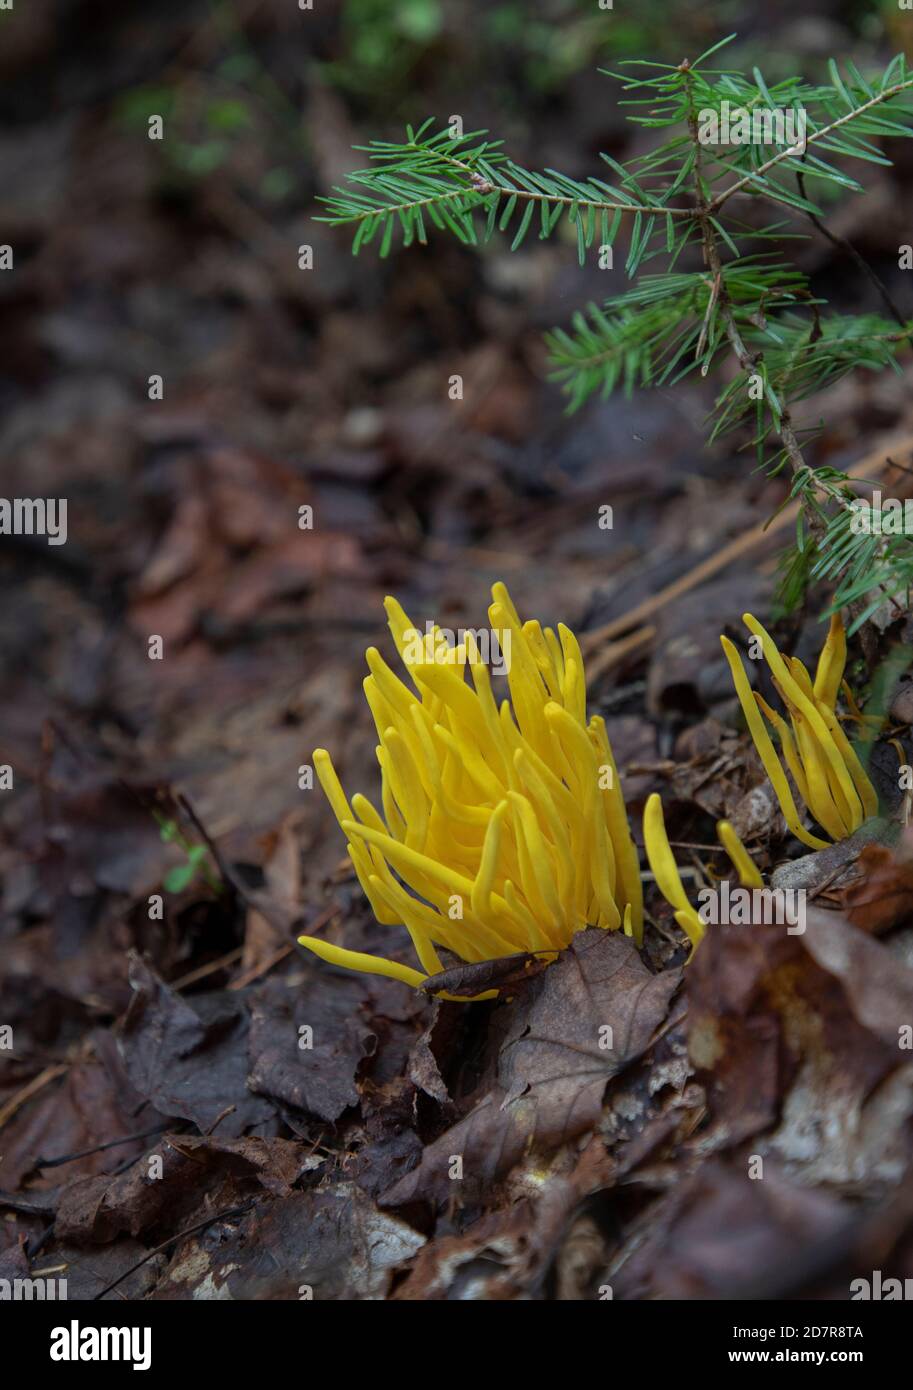 Clusters of Clavulinopsis fusiformis or spindle shaped yellow coral fungi Stock Photo